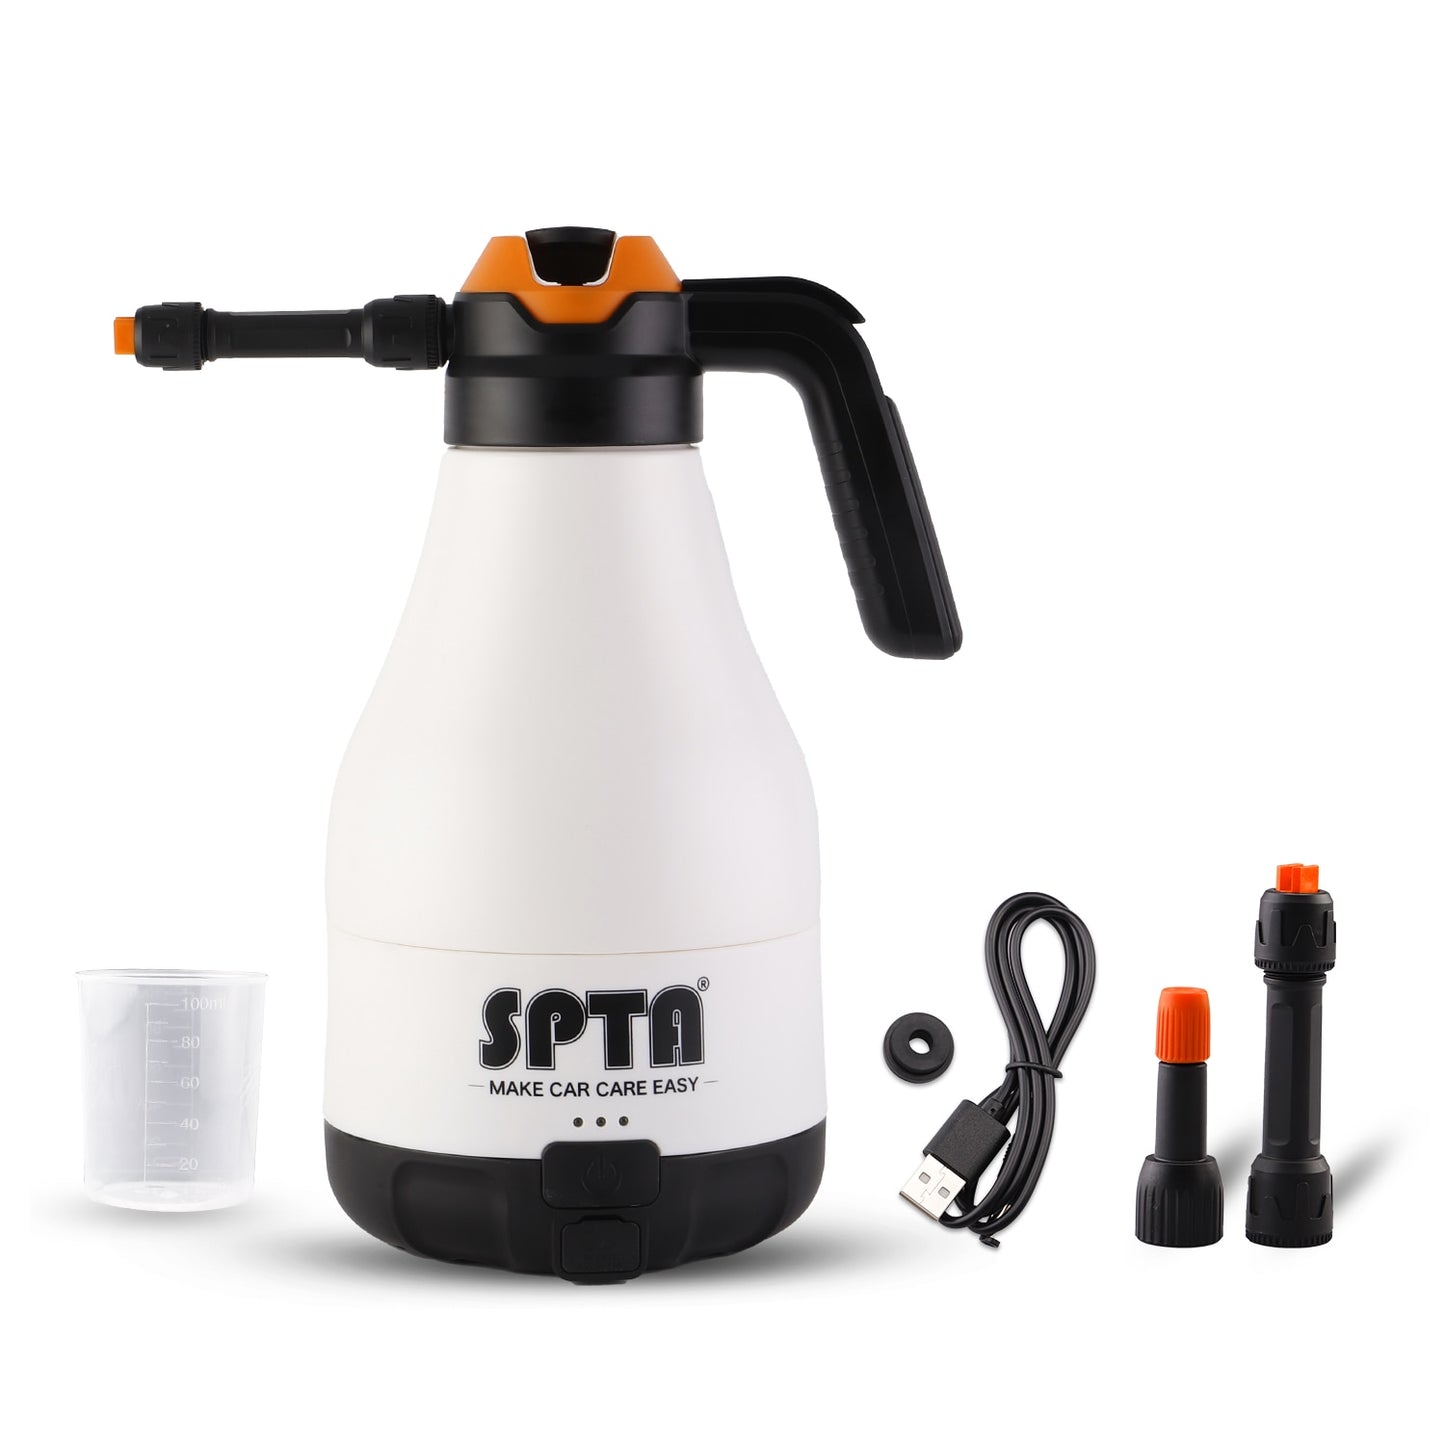 SPTA 1.8L Cordless Charging Car Sprayer - Foam Pressure Pot for Home & Vehicle Cleaning